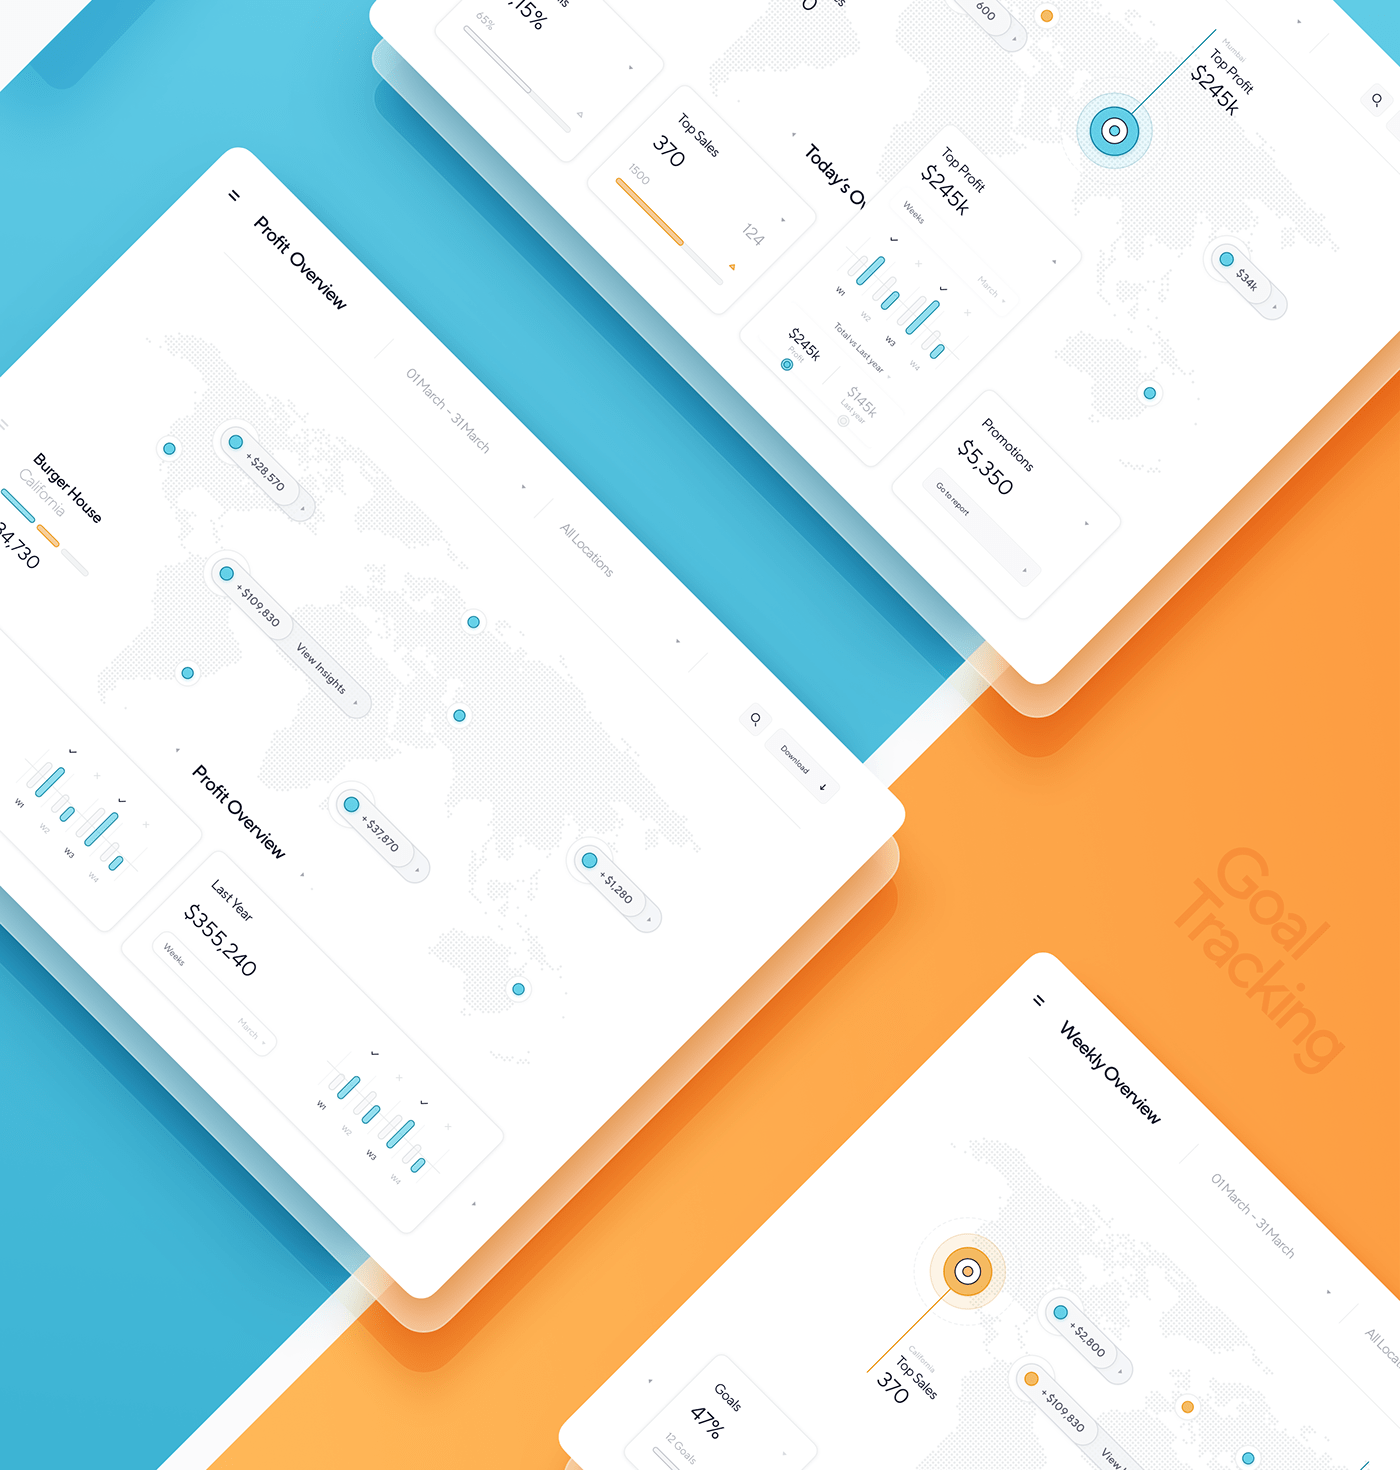 Dtail Design System - liberty to evolve UI and UX design alongside business goals.  - Dtail Studio